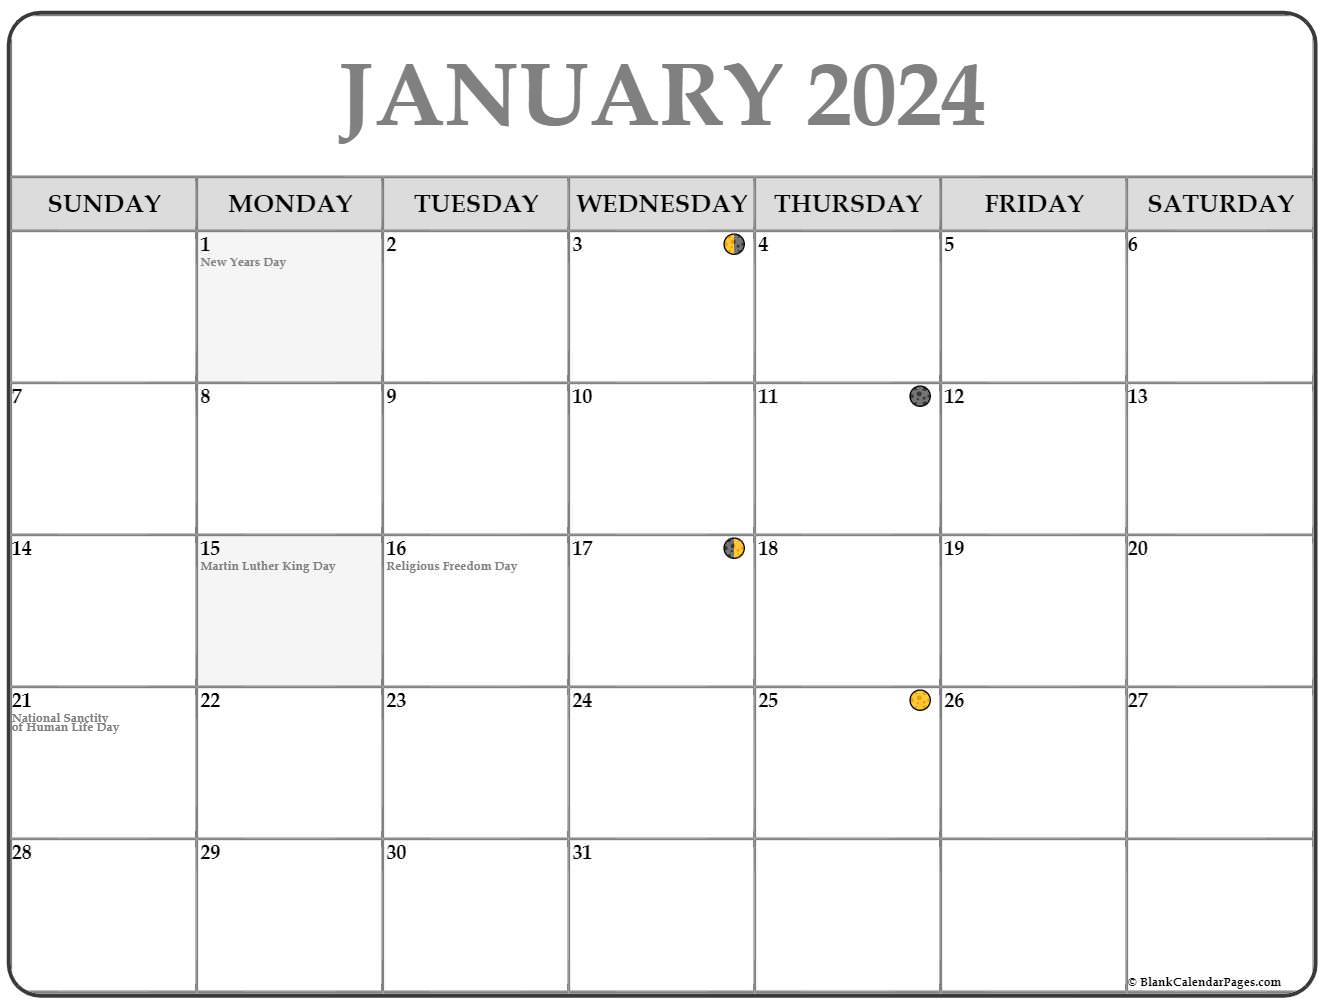 Full Moon Schedule For January 2024 carte ign